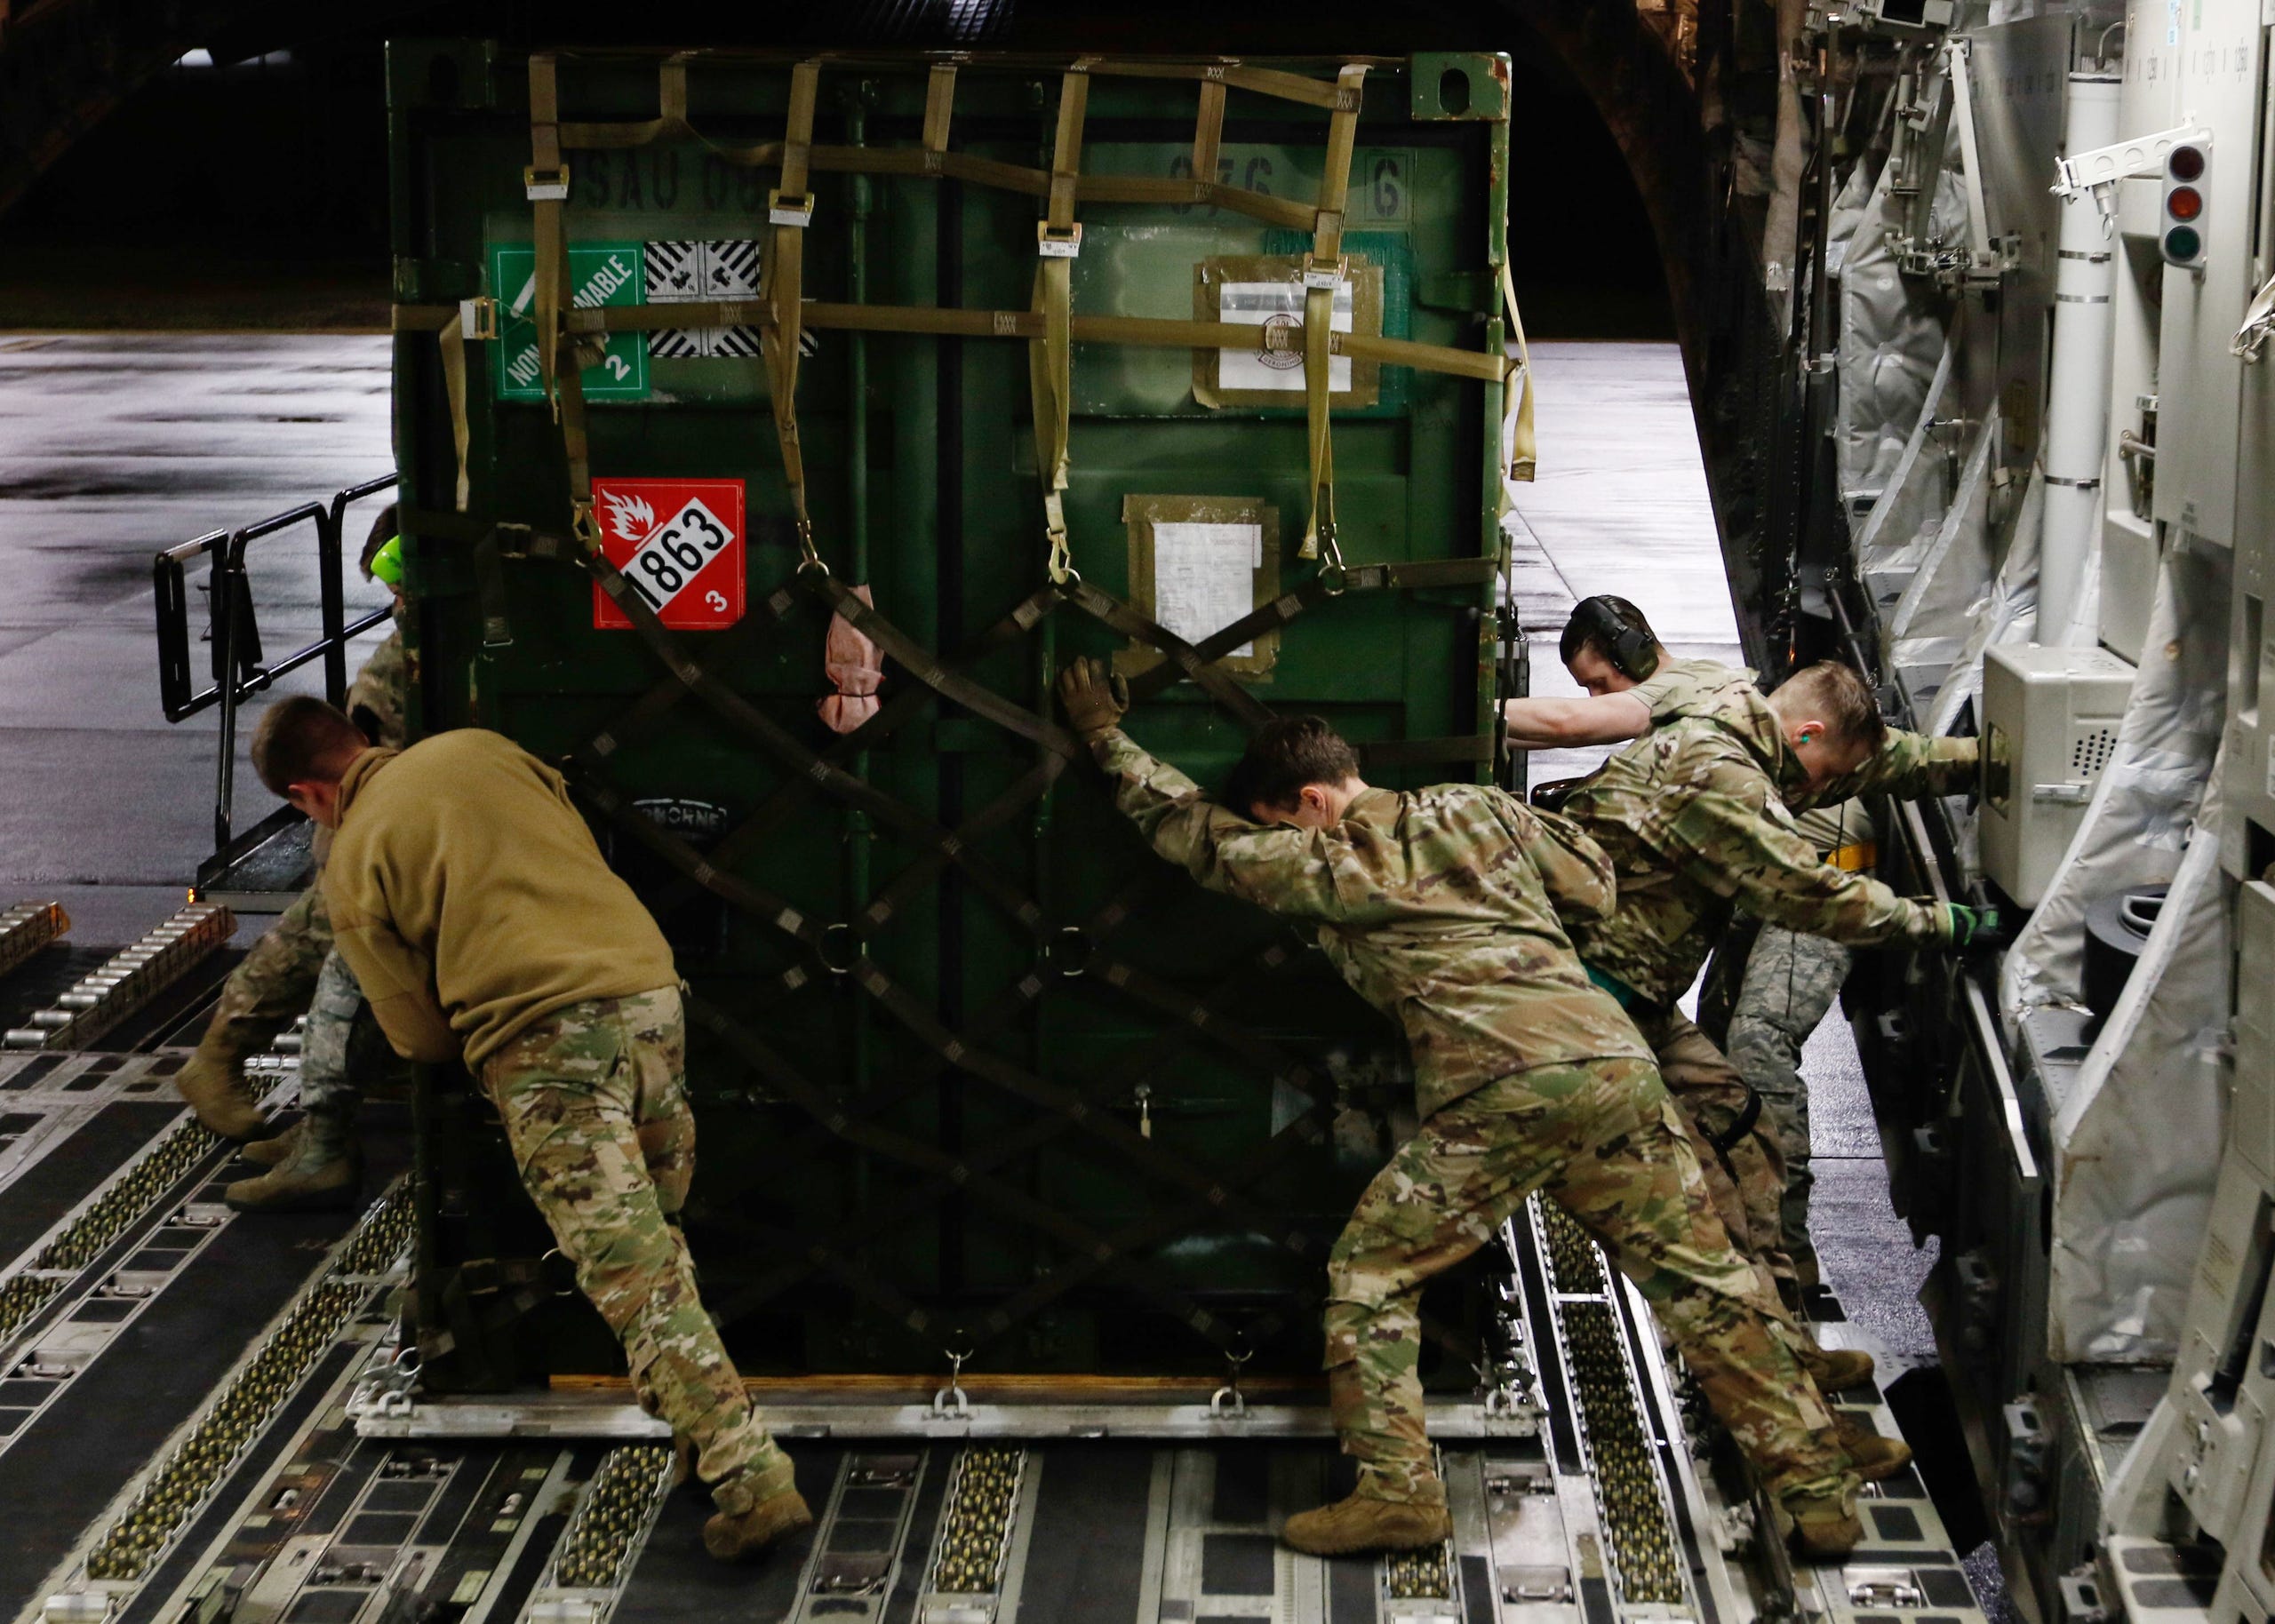  US Air Force personnel load 82nd Airborne Division equipment onto a C-17 Globemaster aircraft bound for the US Central Command area of operations